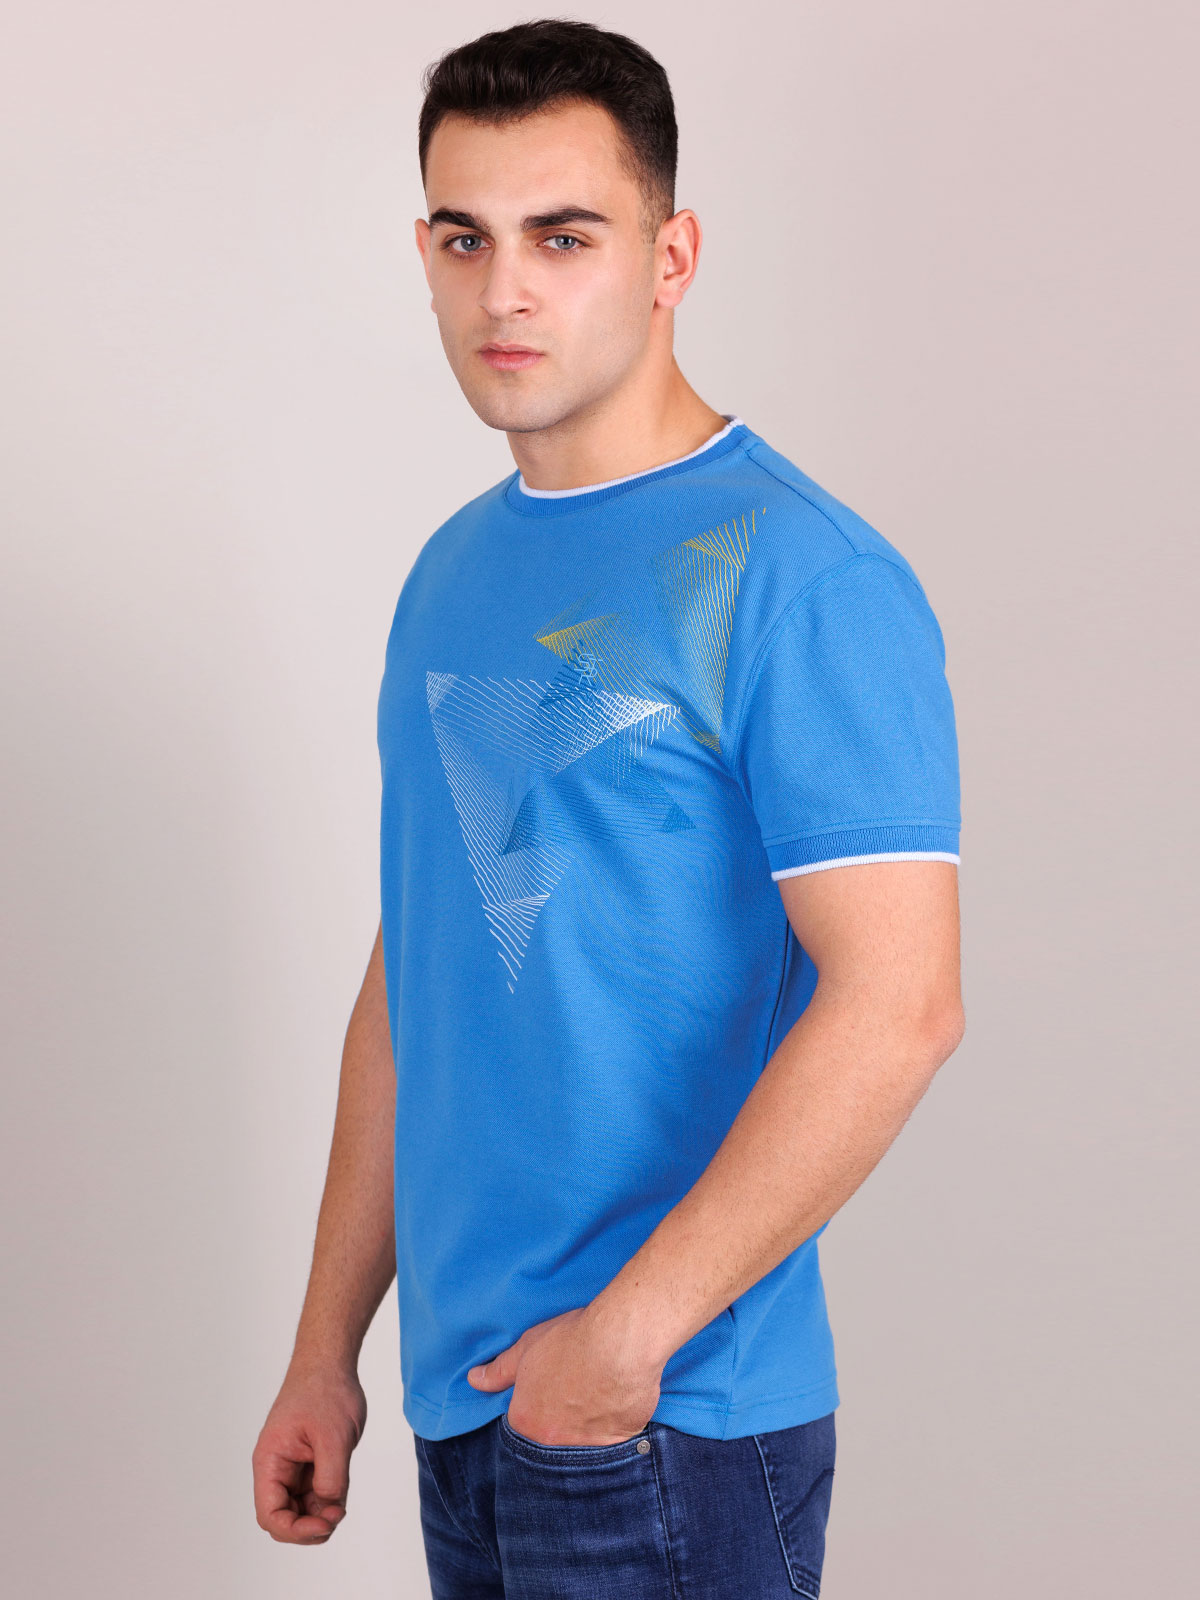 Tshirt in blue with a spectacular print - 95362 € 19.12 img3